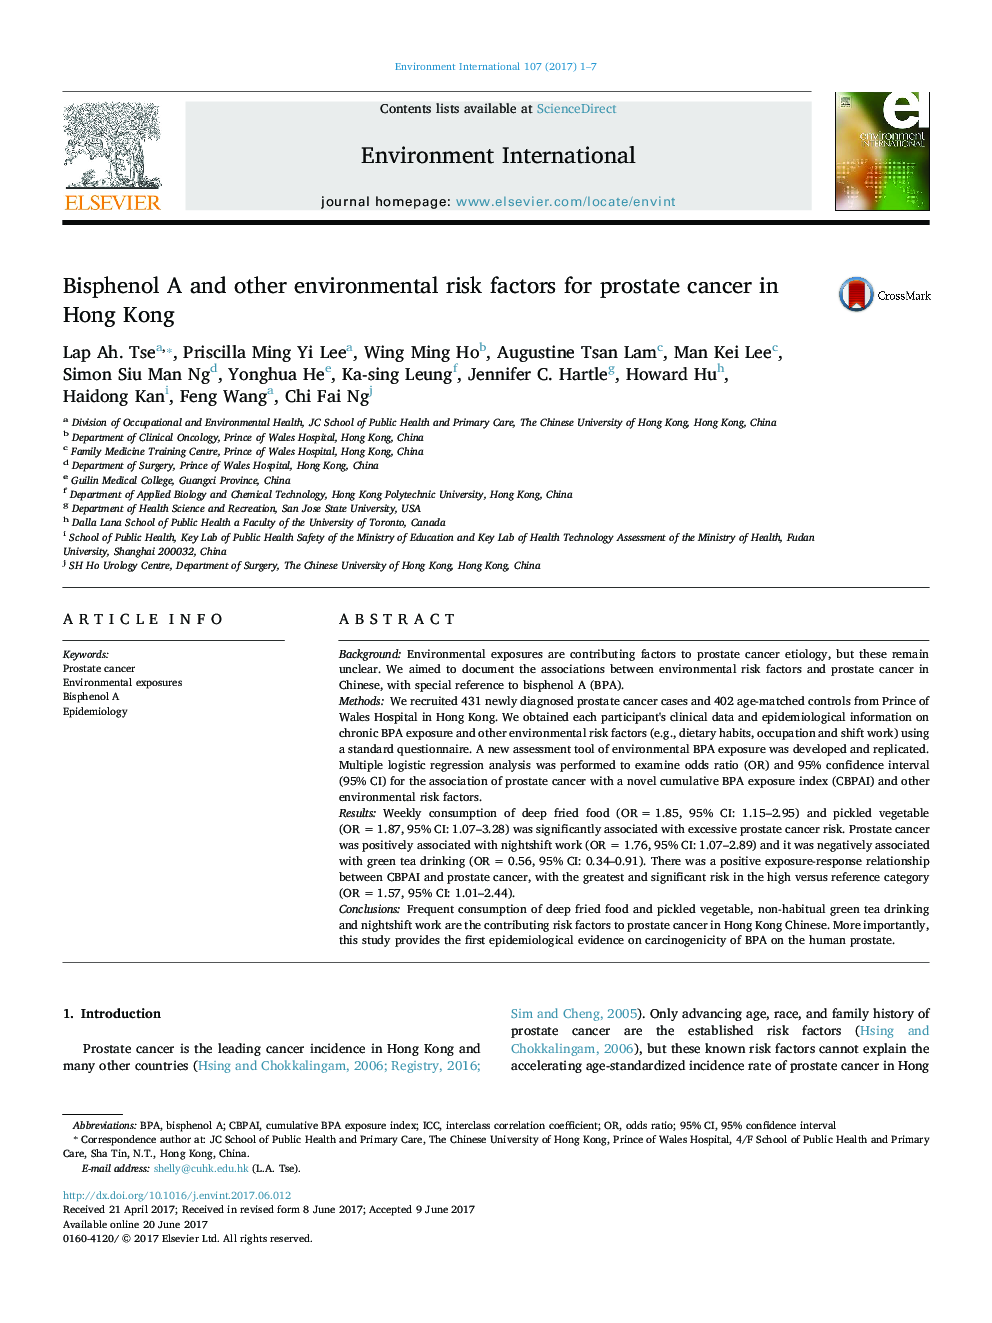 Bisphenol A and other environmental risk factors for prostate cancer in Hong Kong